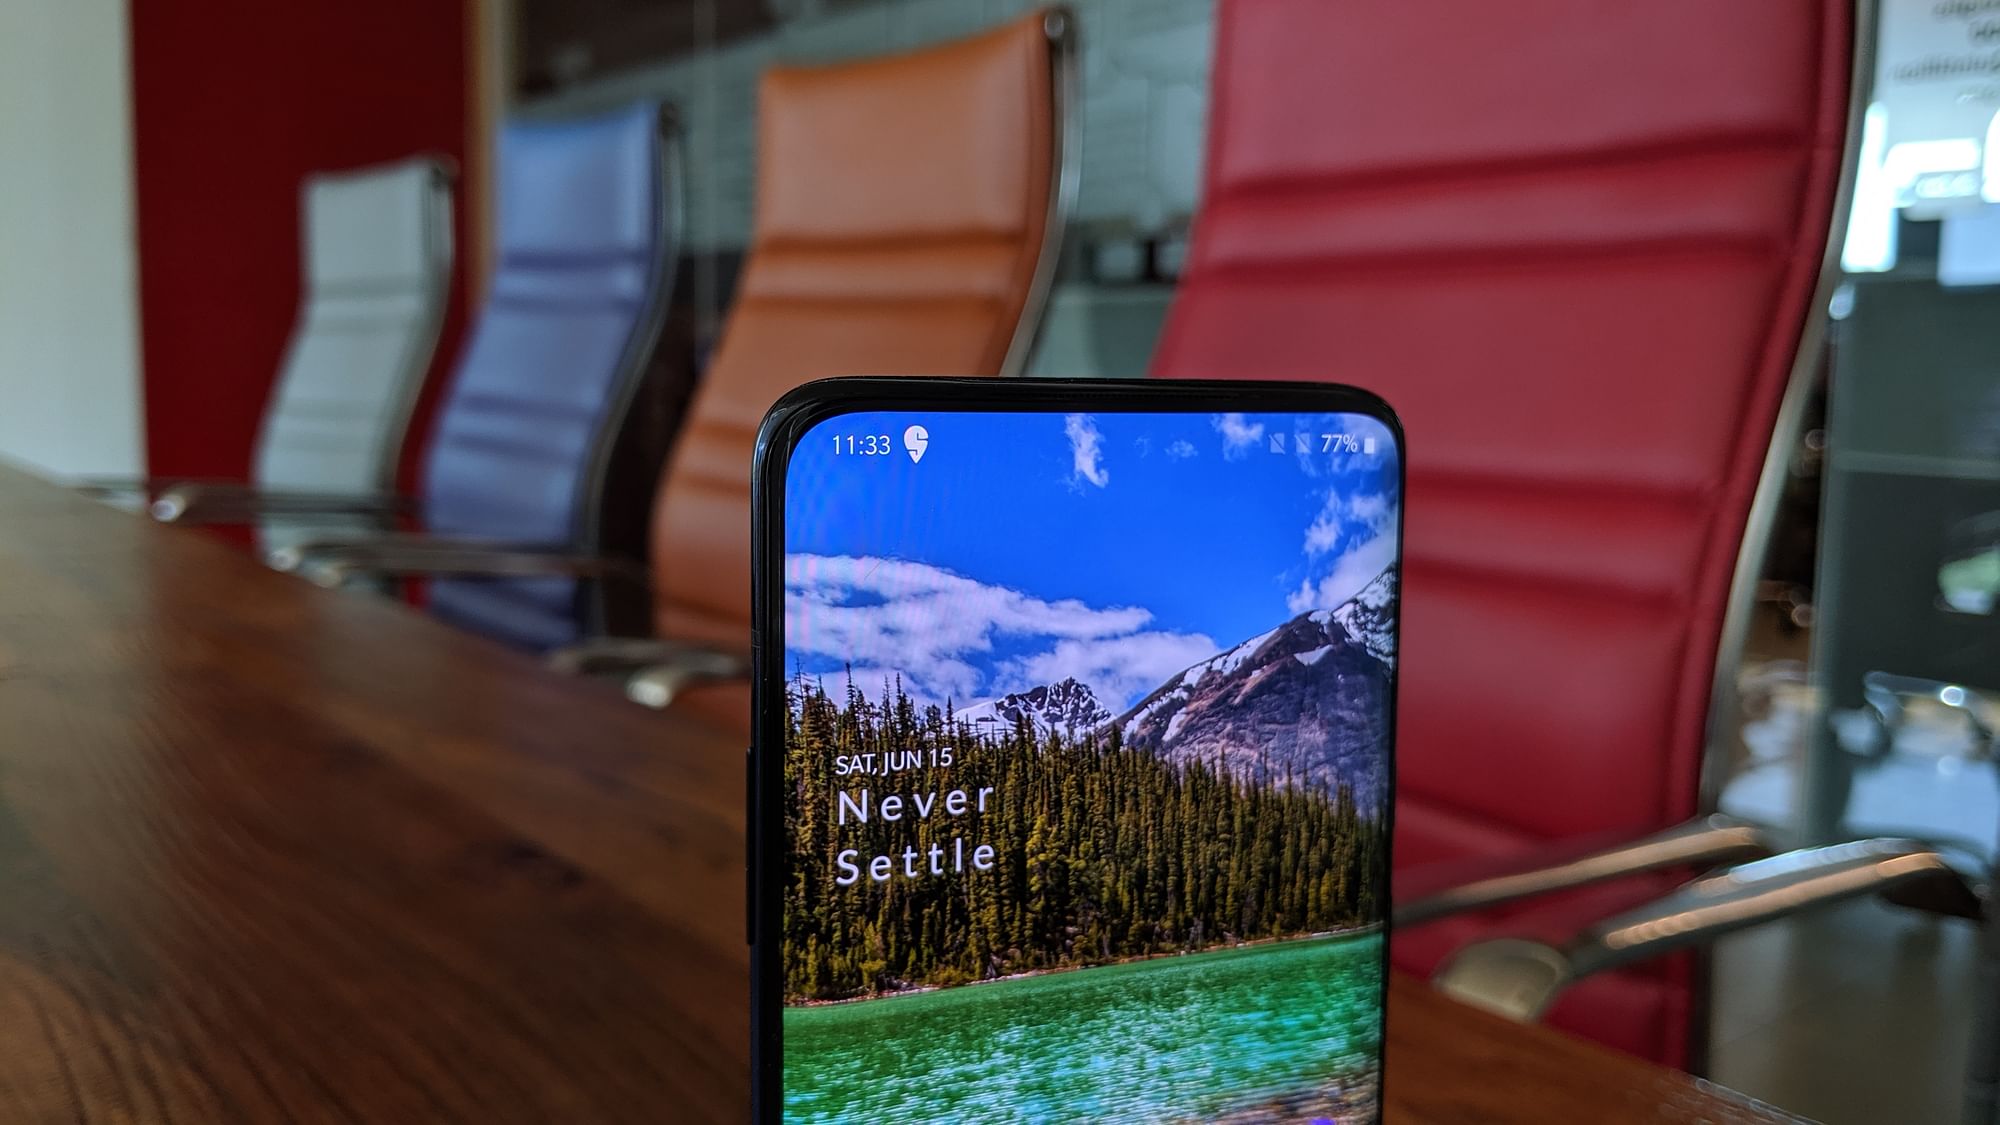 OnePlus 7 Pro comes with front-facing pop-up camera at the top.